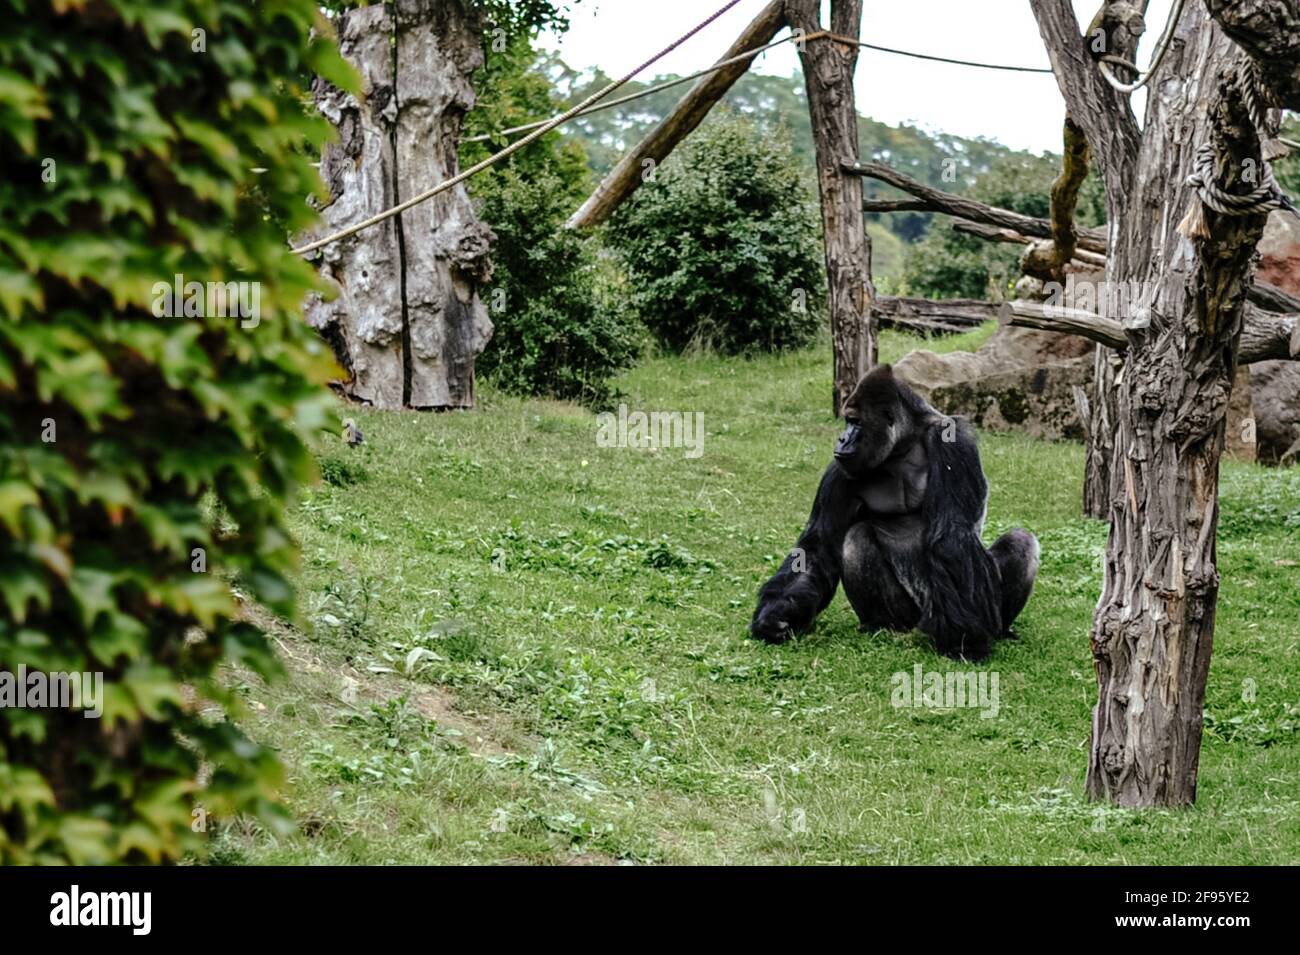 Charismatic  animals, gorillas share 98.3% of their DNA with humans. Stock Photo